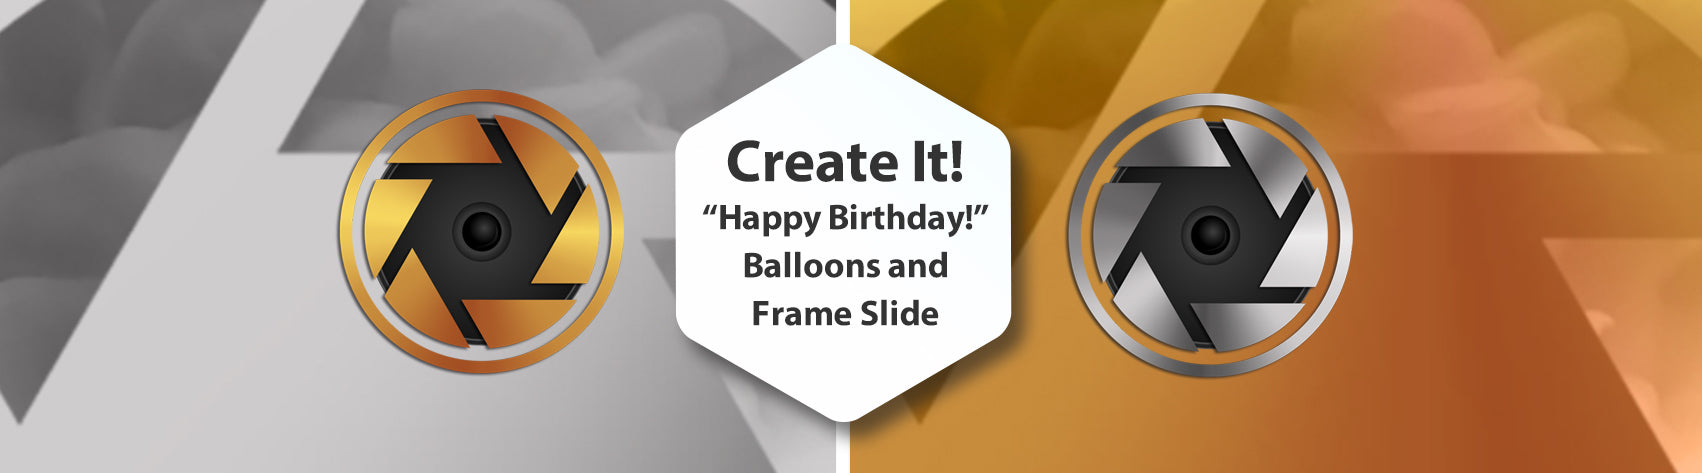 Create It!  "Happy Birthday!" Balloons and Frame